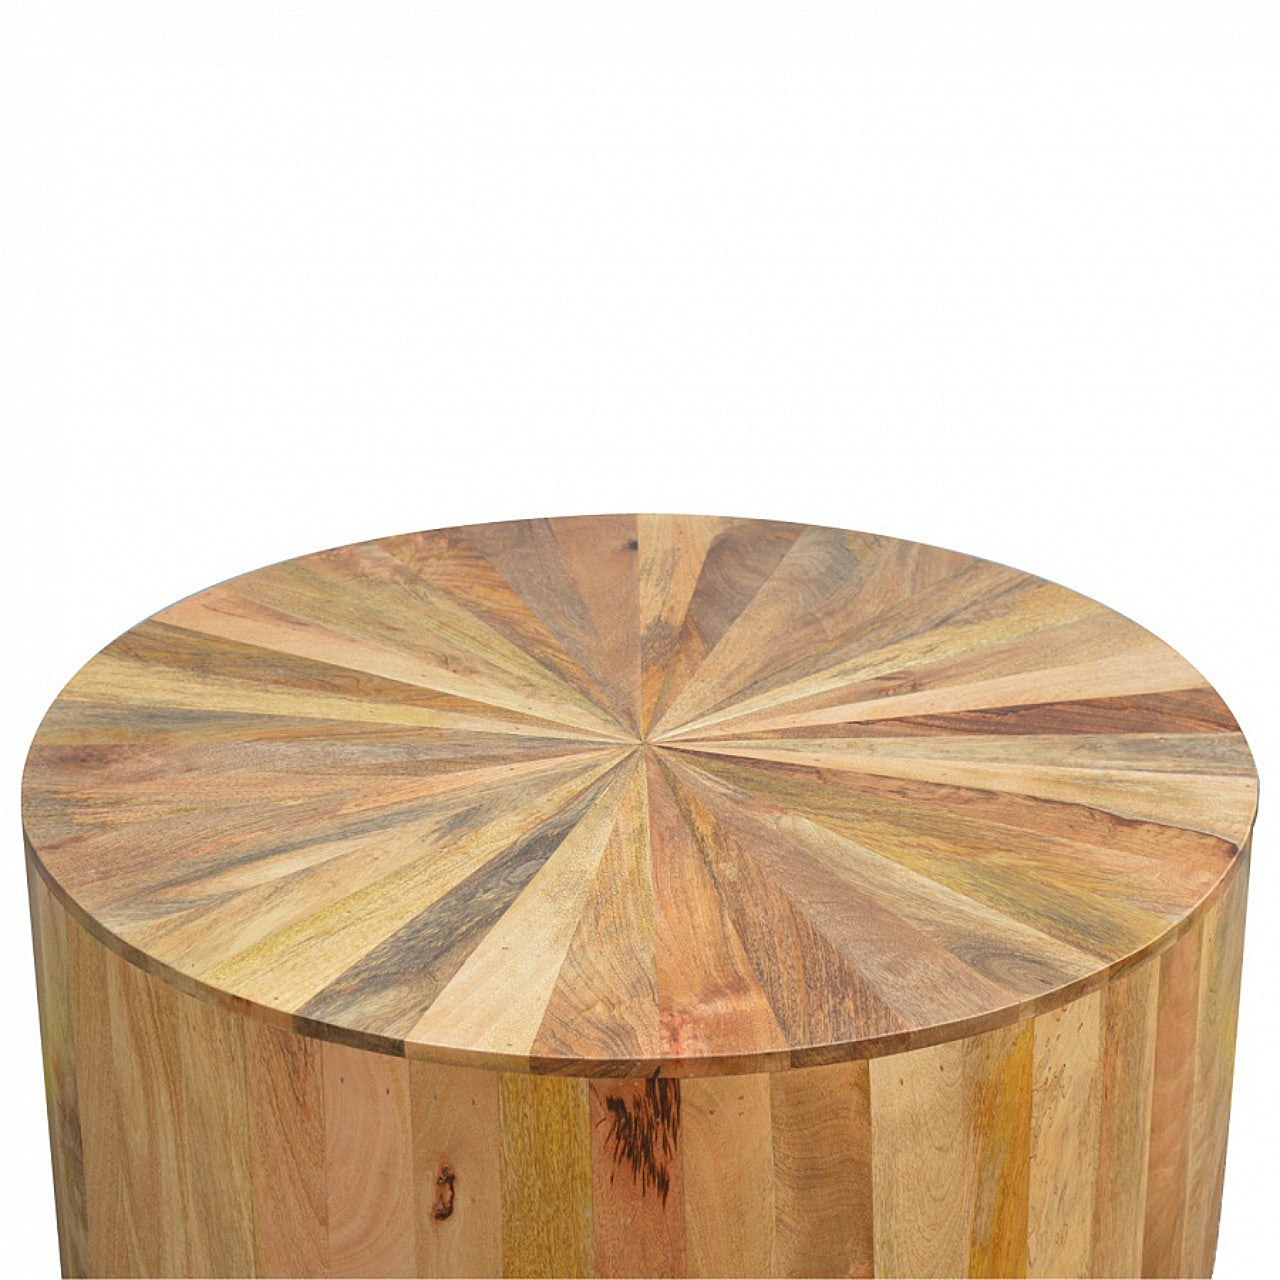 View Round Wooden Coffee Table information